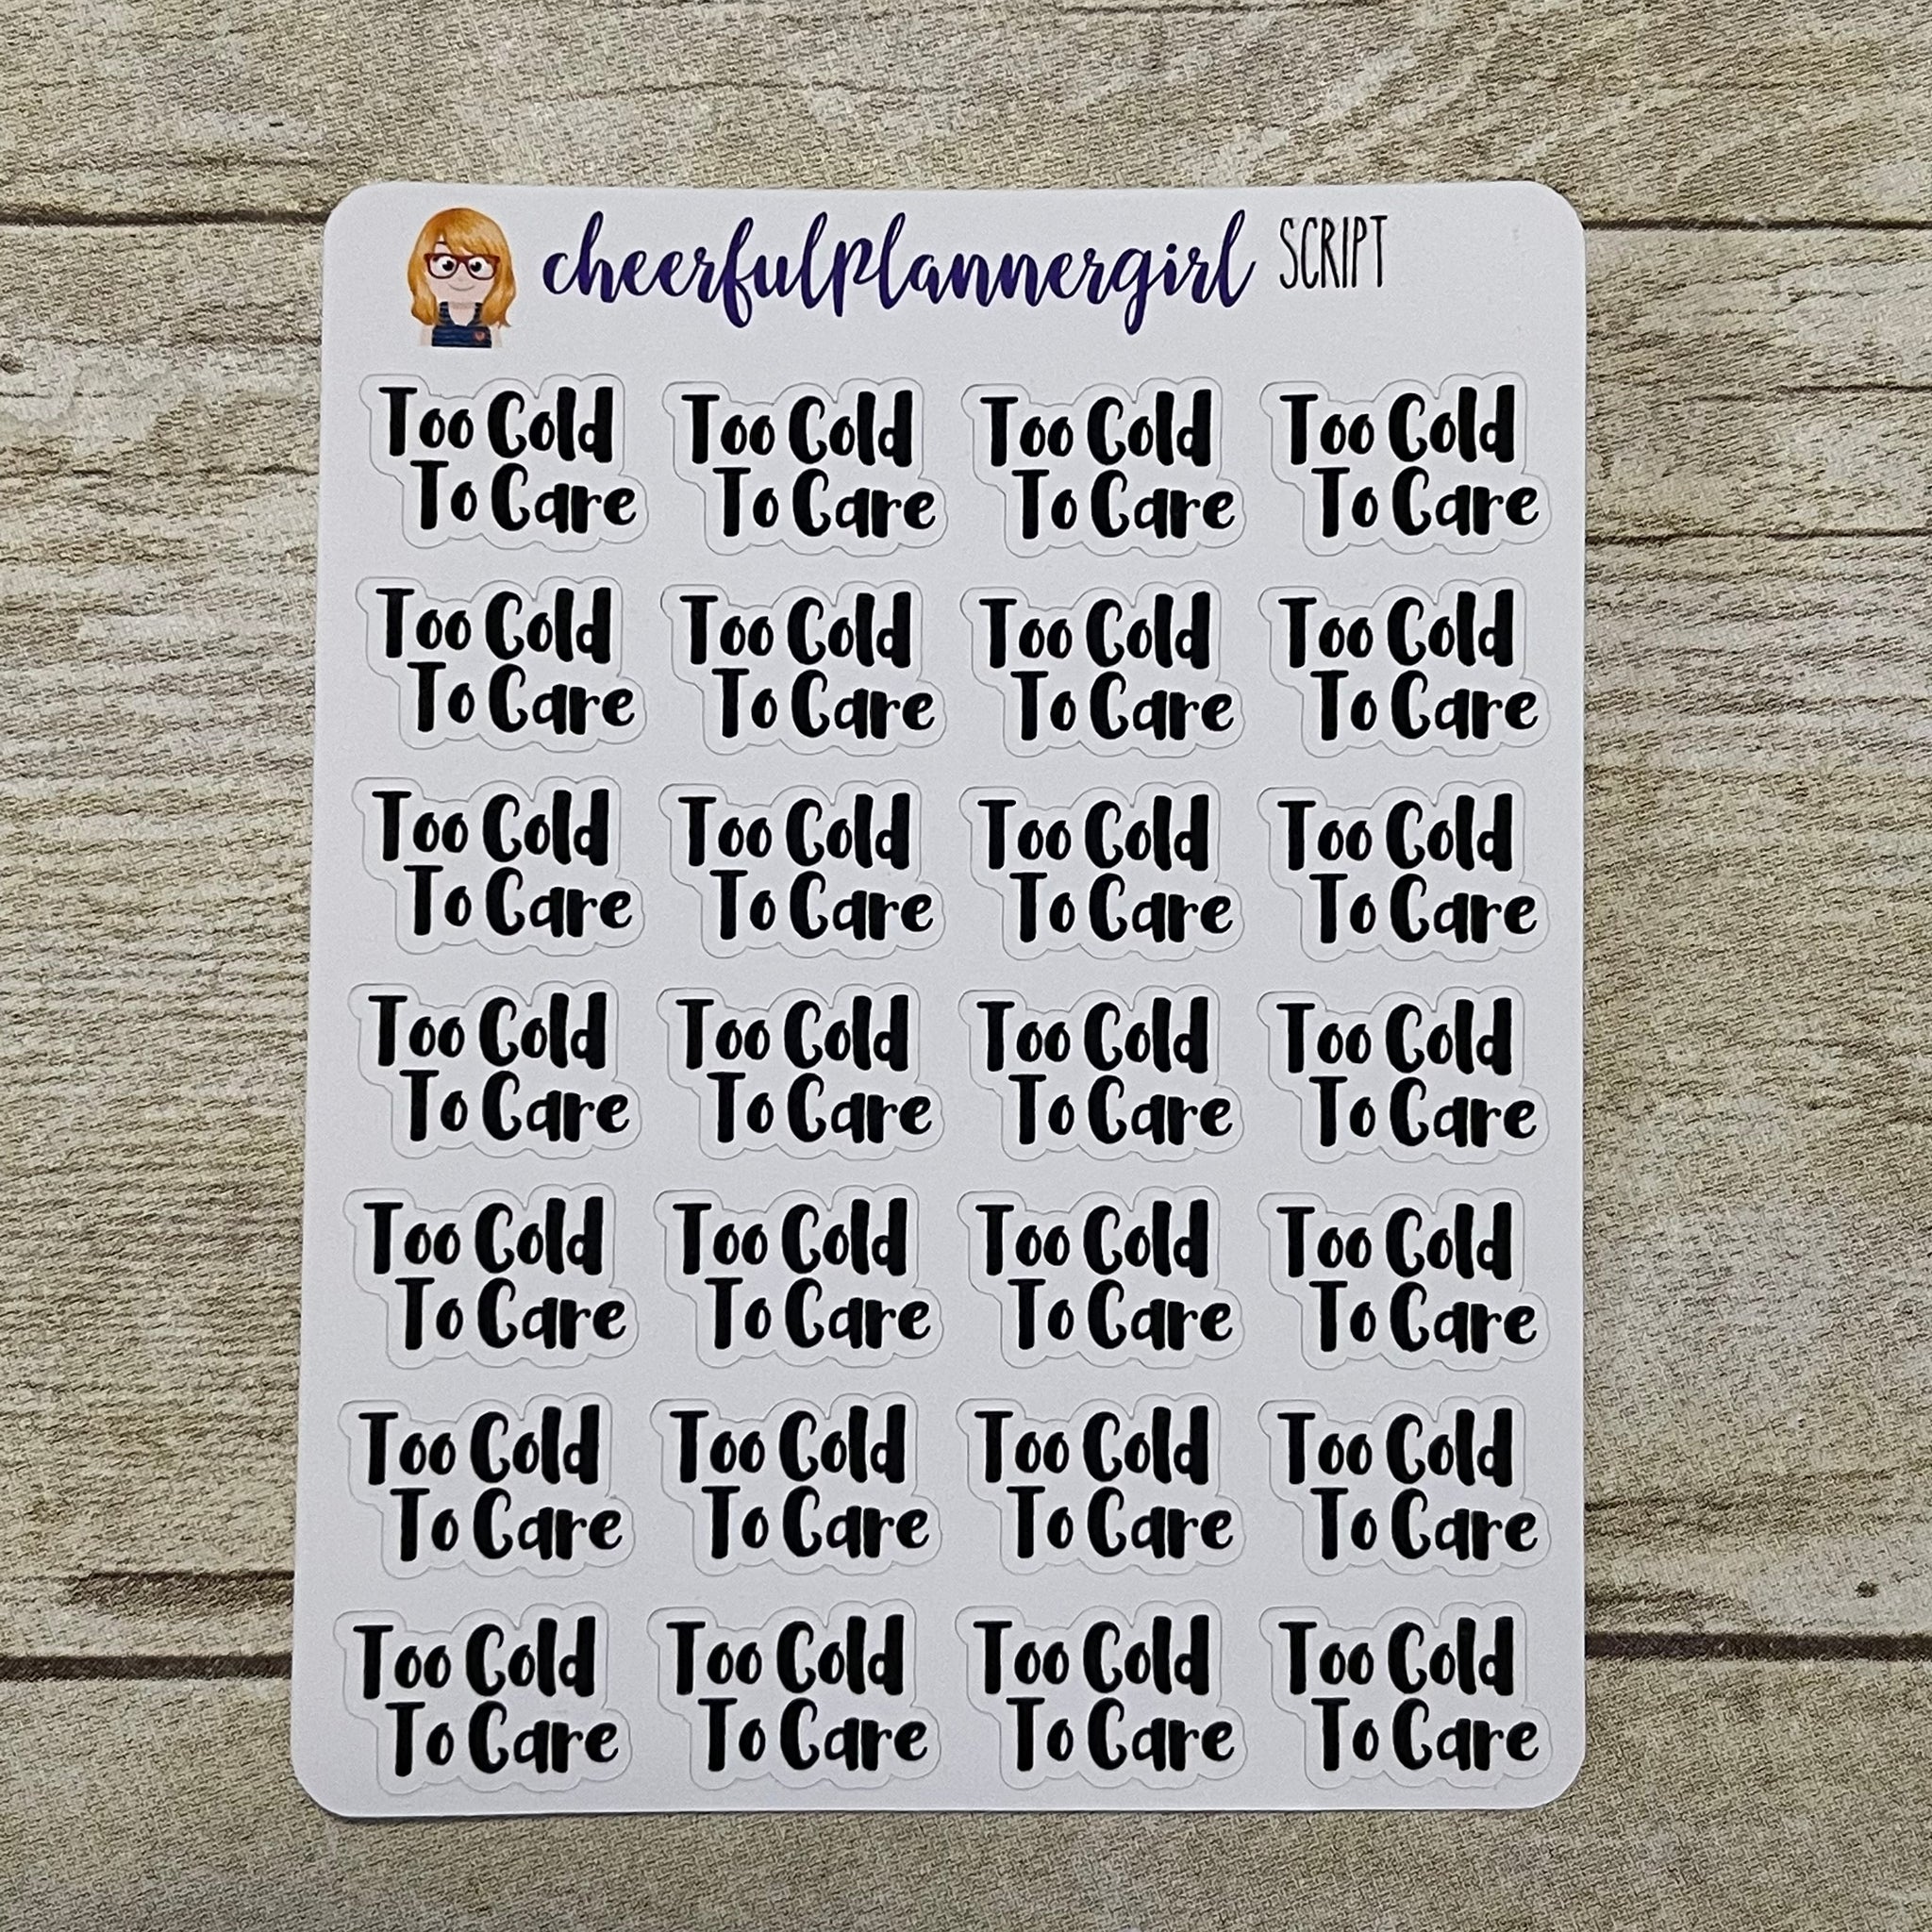 Too Cold To Care Script Planner Stickers